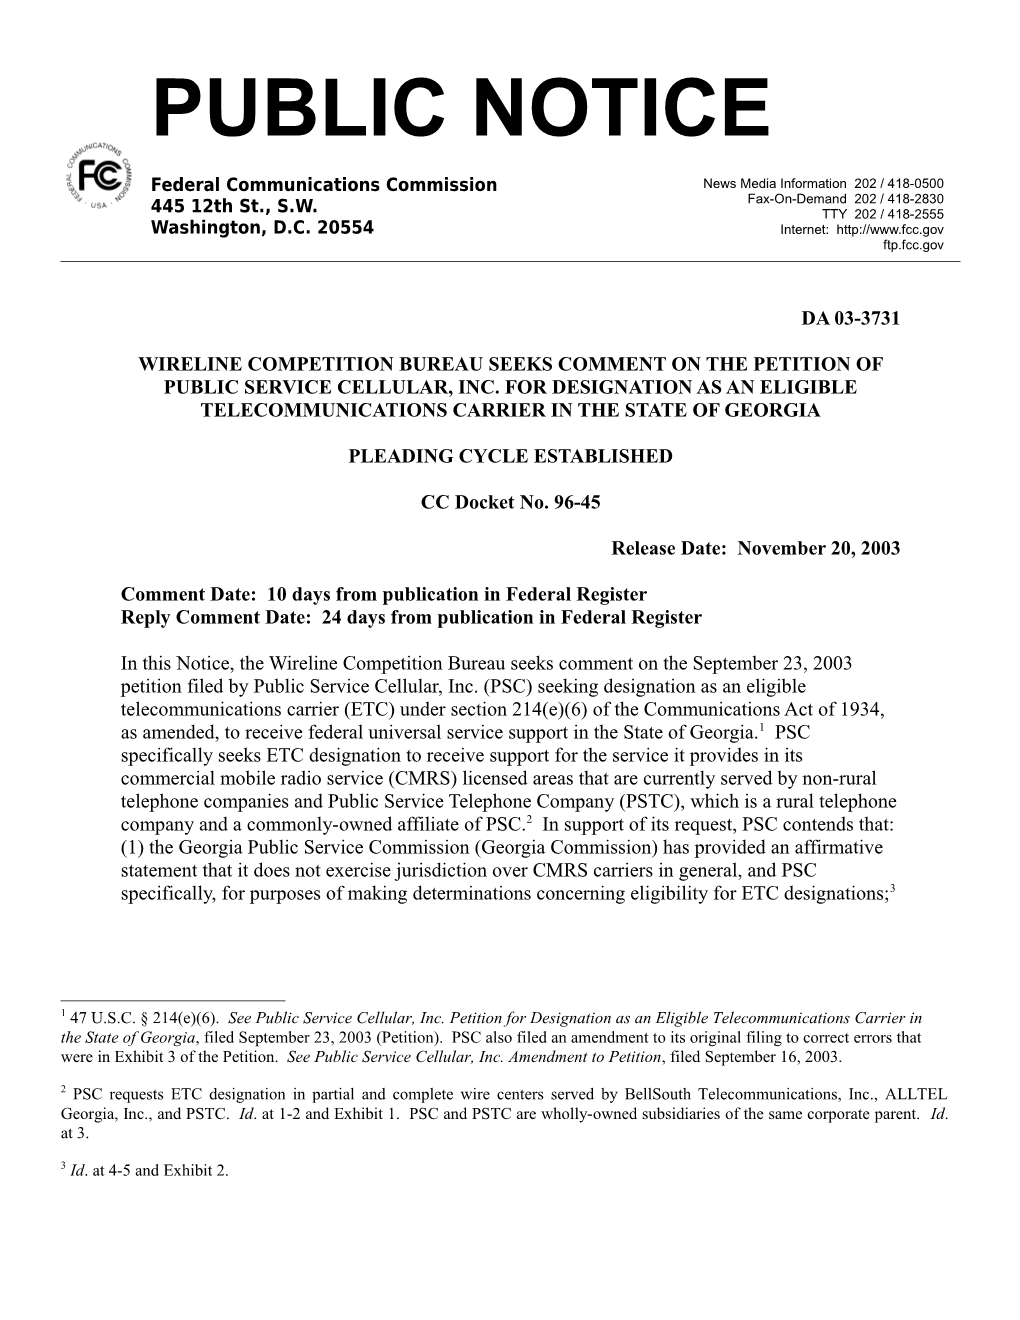 Comment Date: 10 Days from Publication in Federal Register